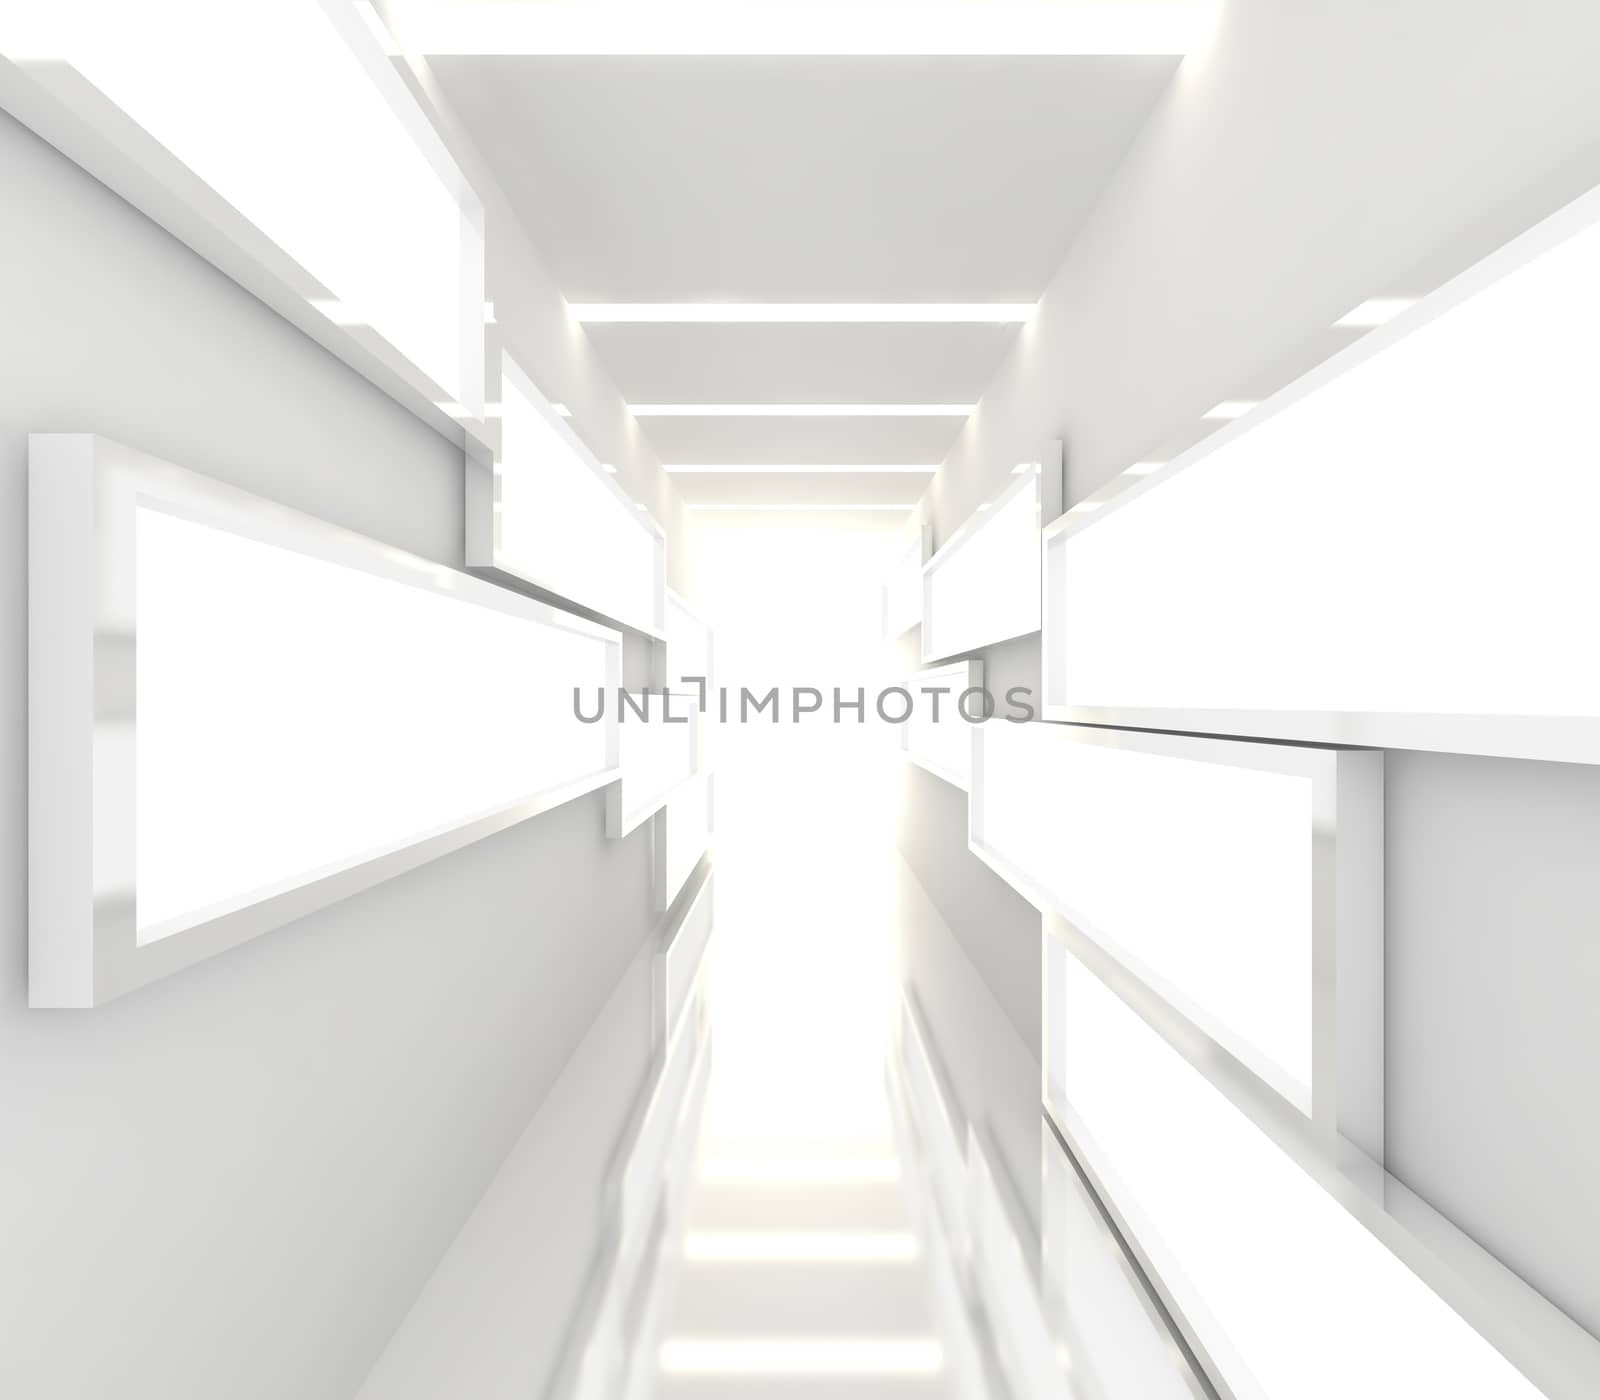 Abstract interior rendering with empty room color white box frame display.